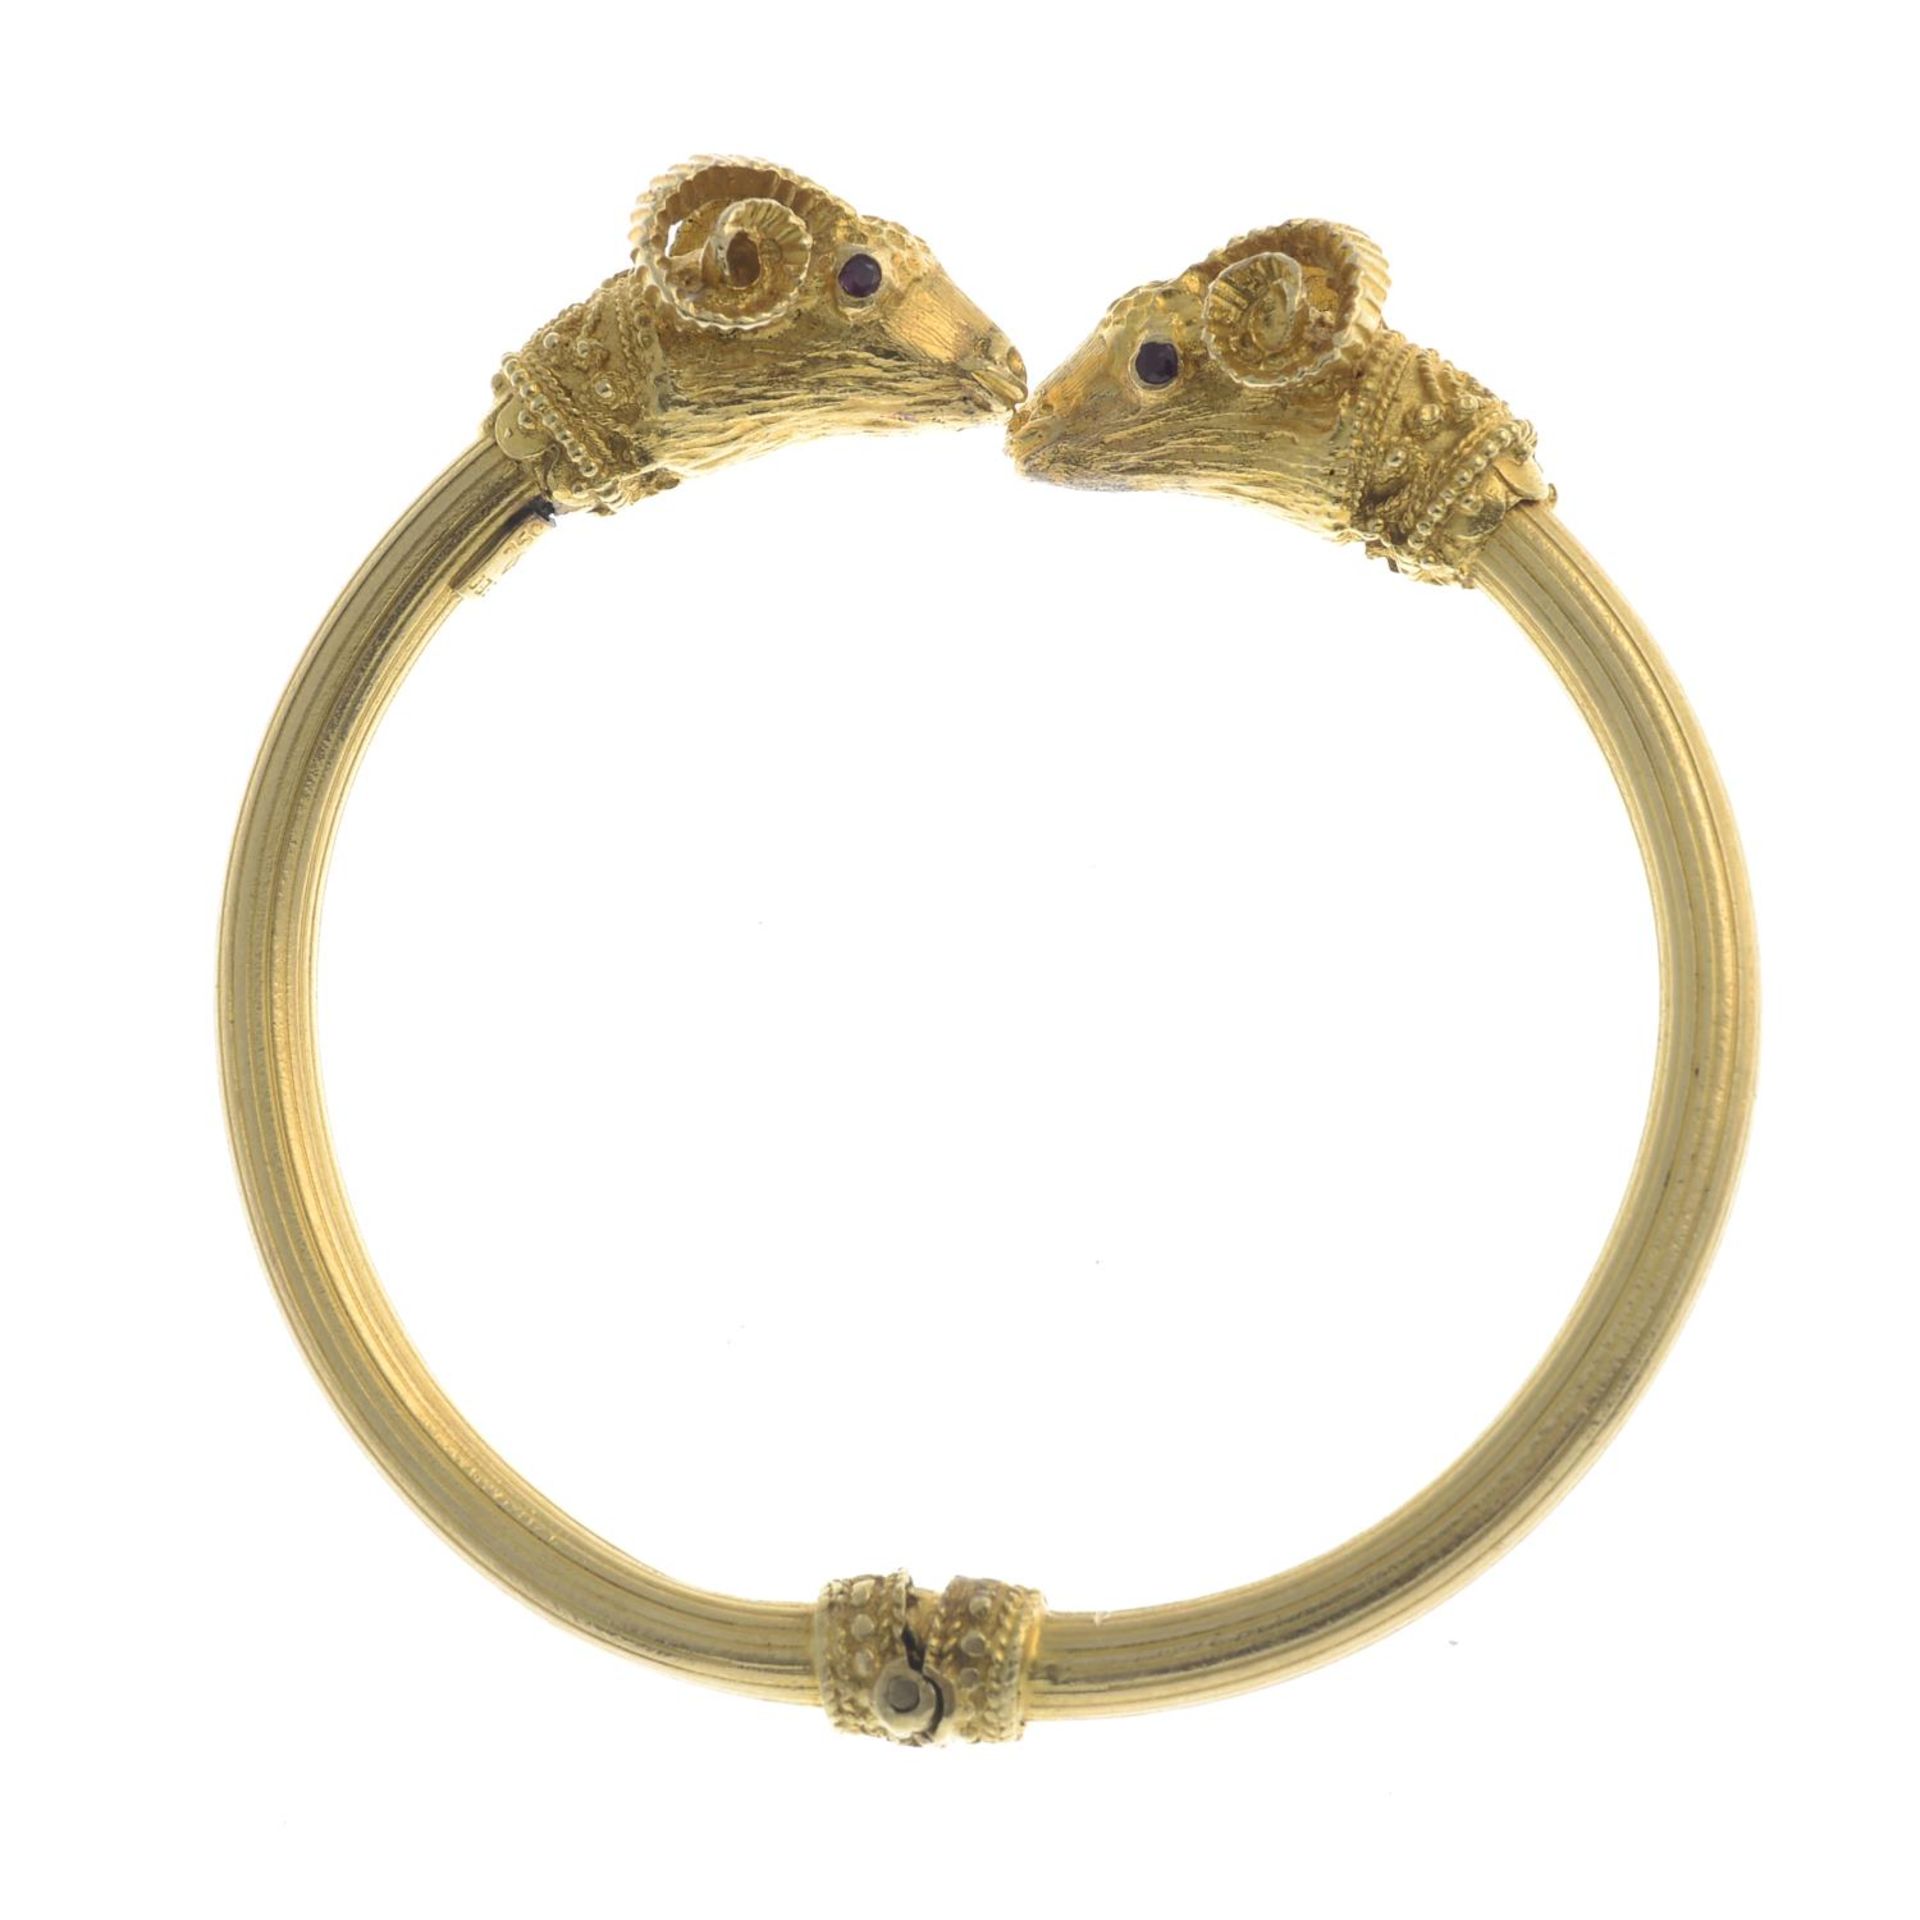 A ram's head hinged bangle, with ruby eyes, by Ilias Lalaounis.Stamped 750. - Image 2 of 5